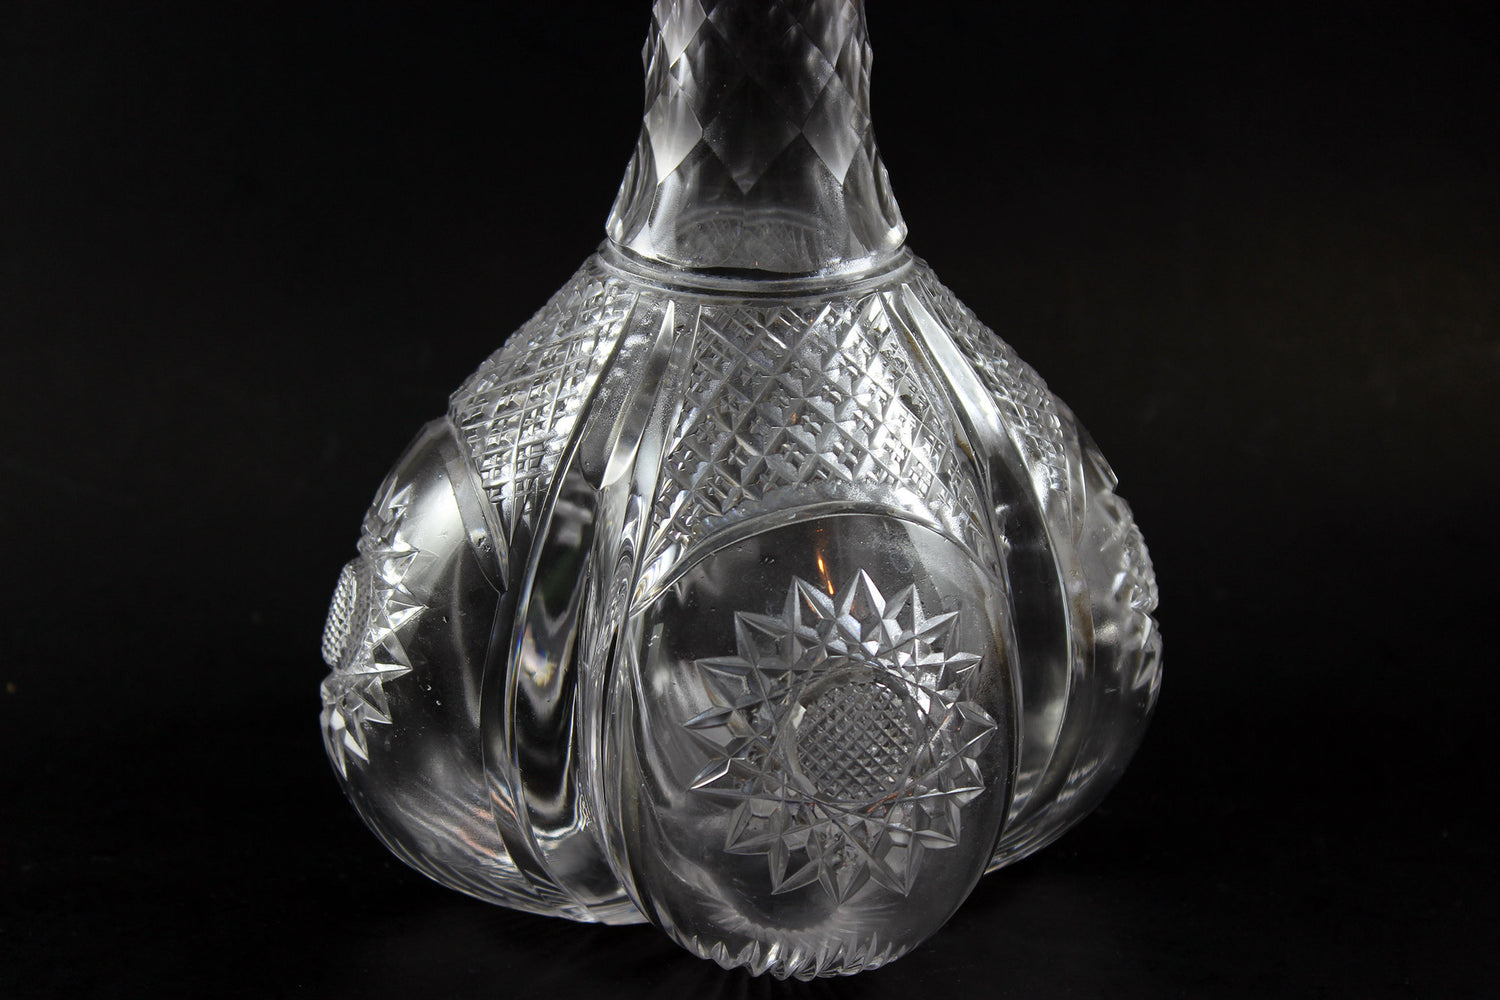 Brilliant Cut Glass Decanter with Sterling Collar 